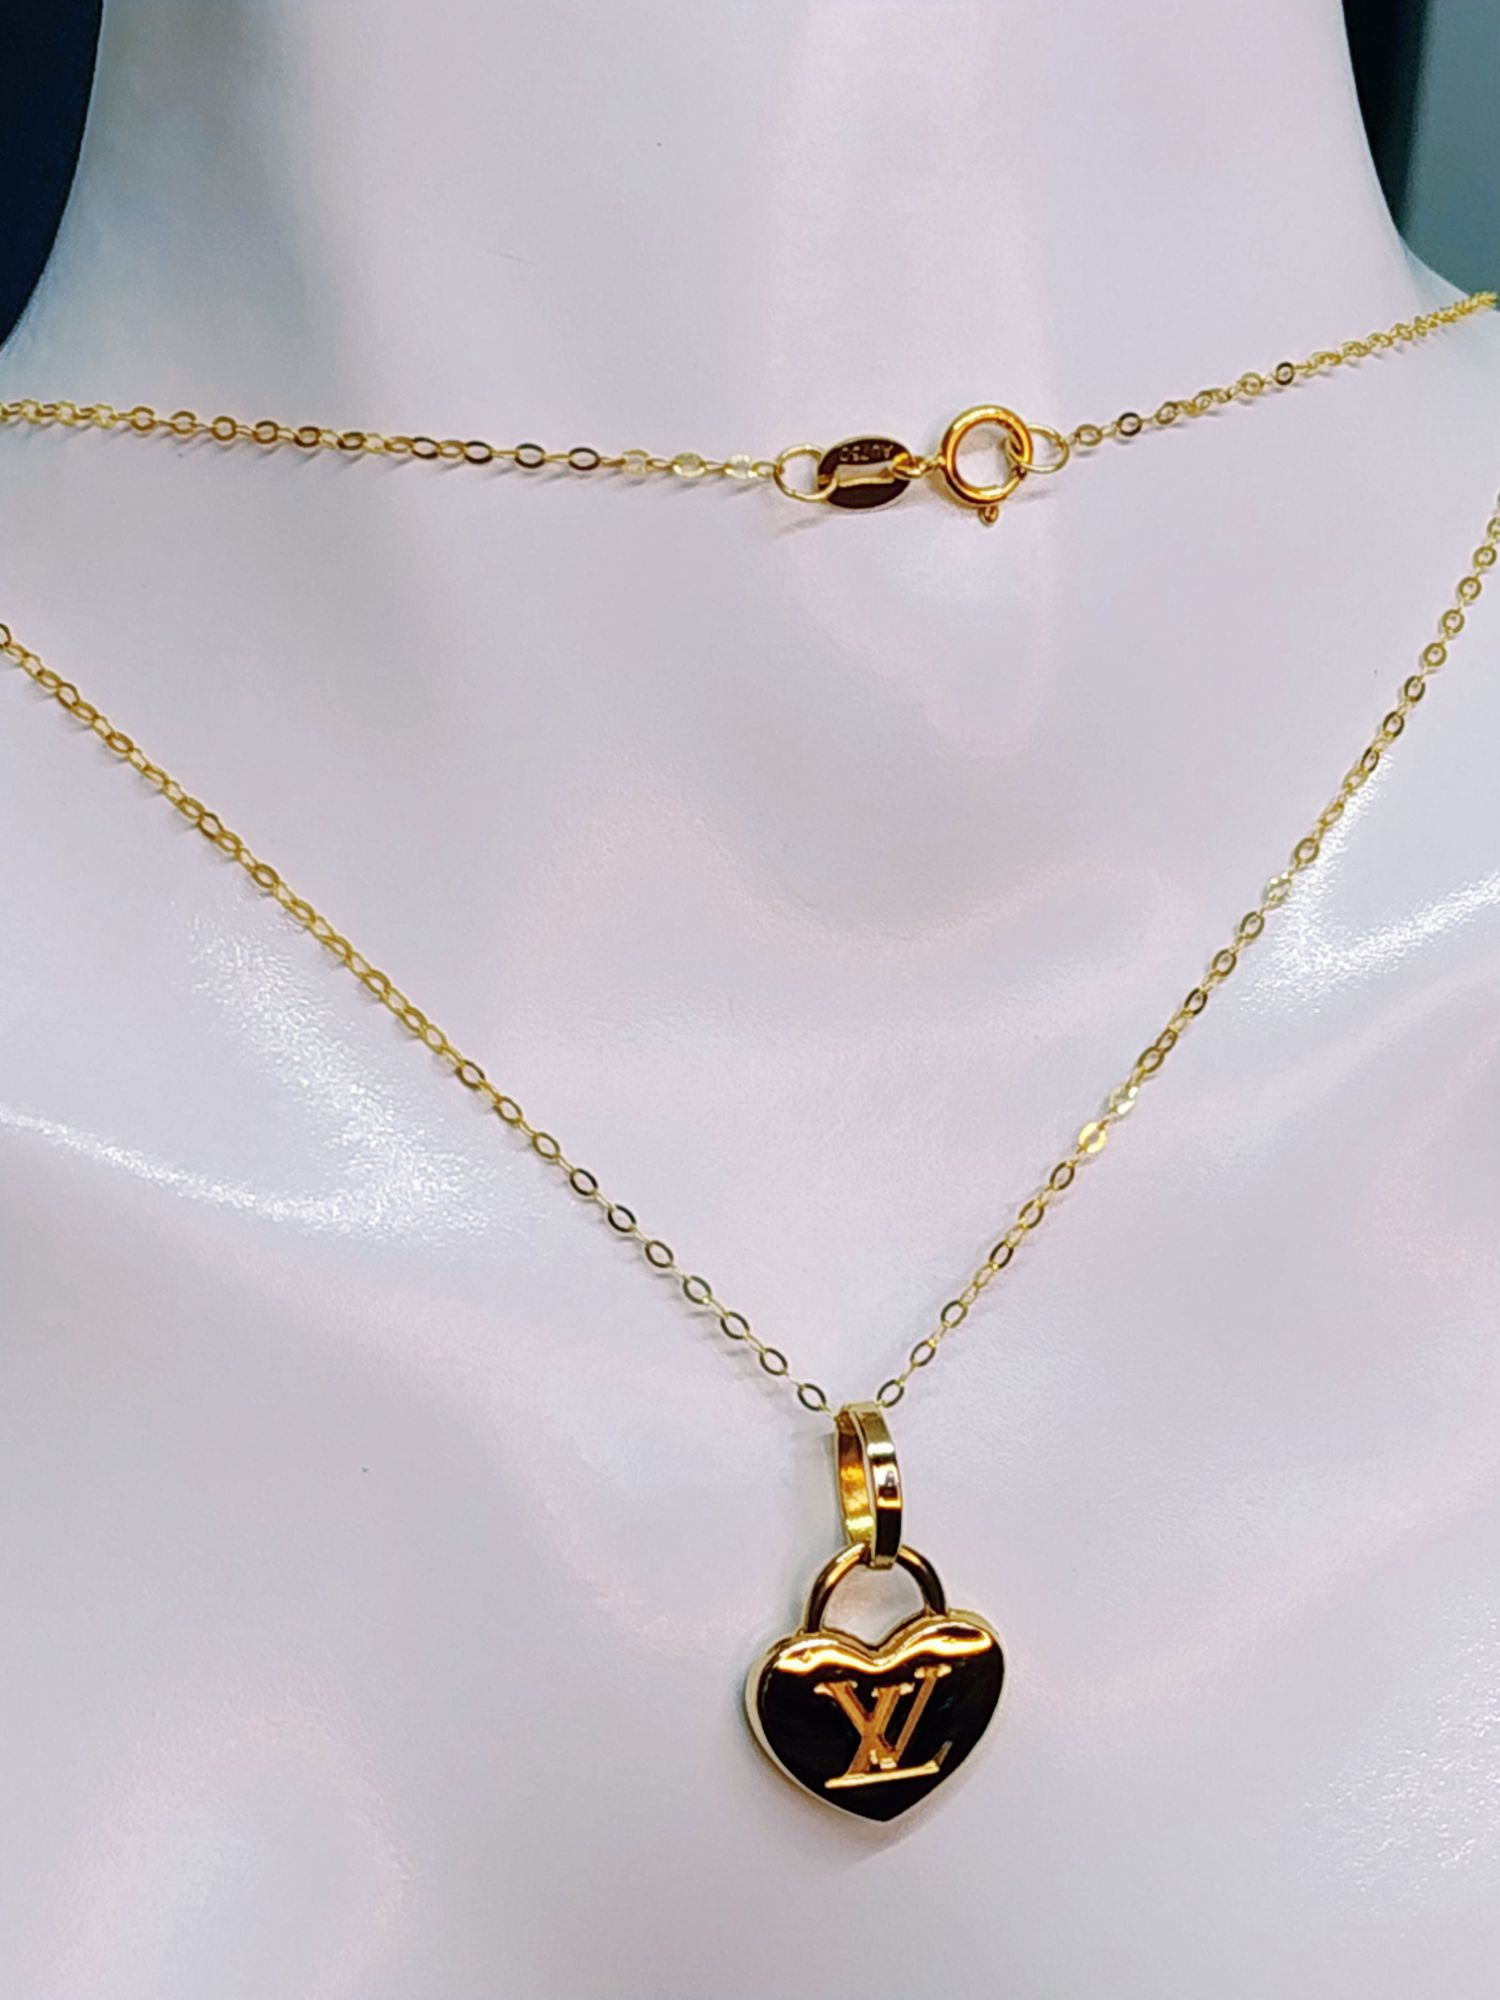 LV HEART 18K SOLID GOLD NECKLACE